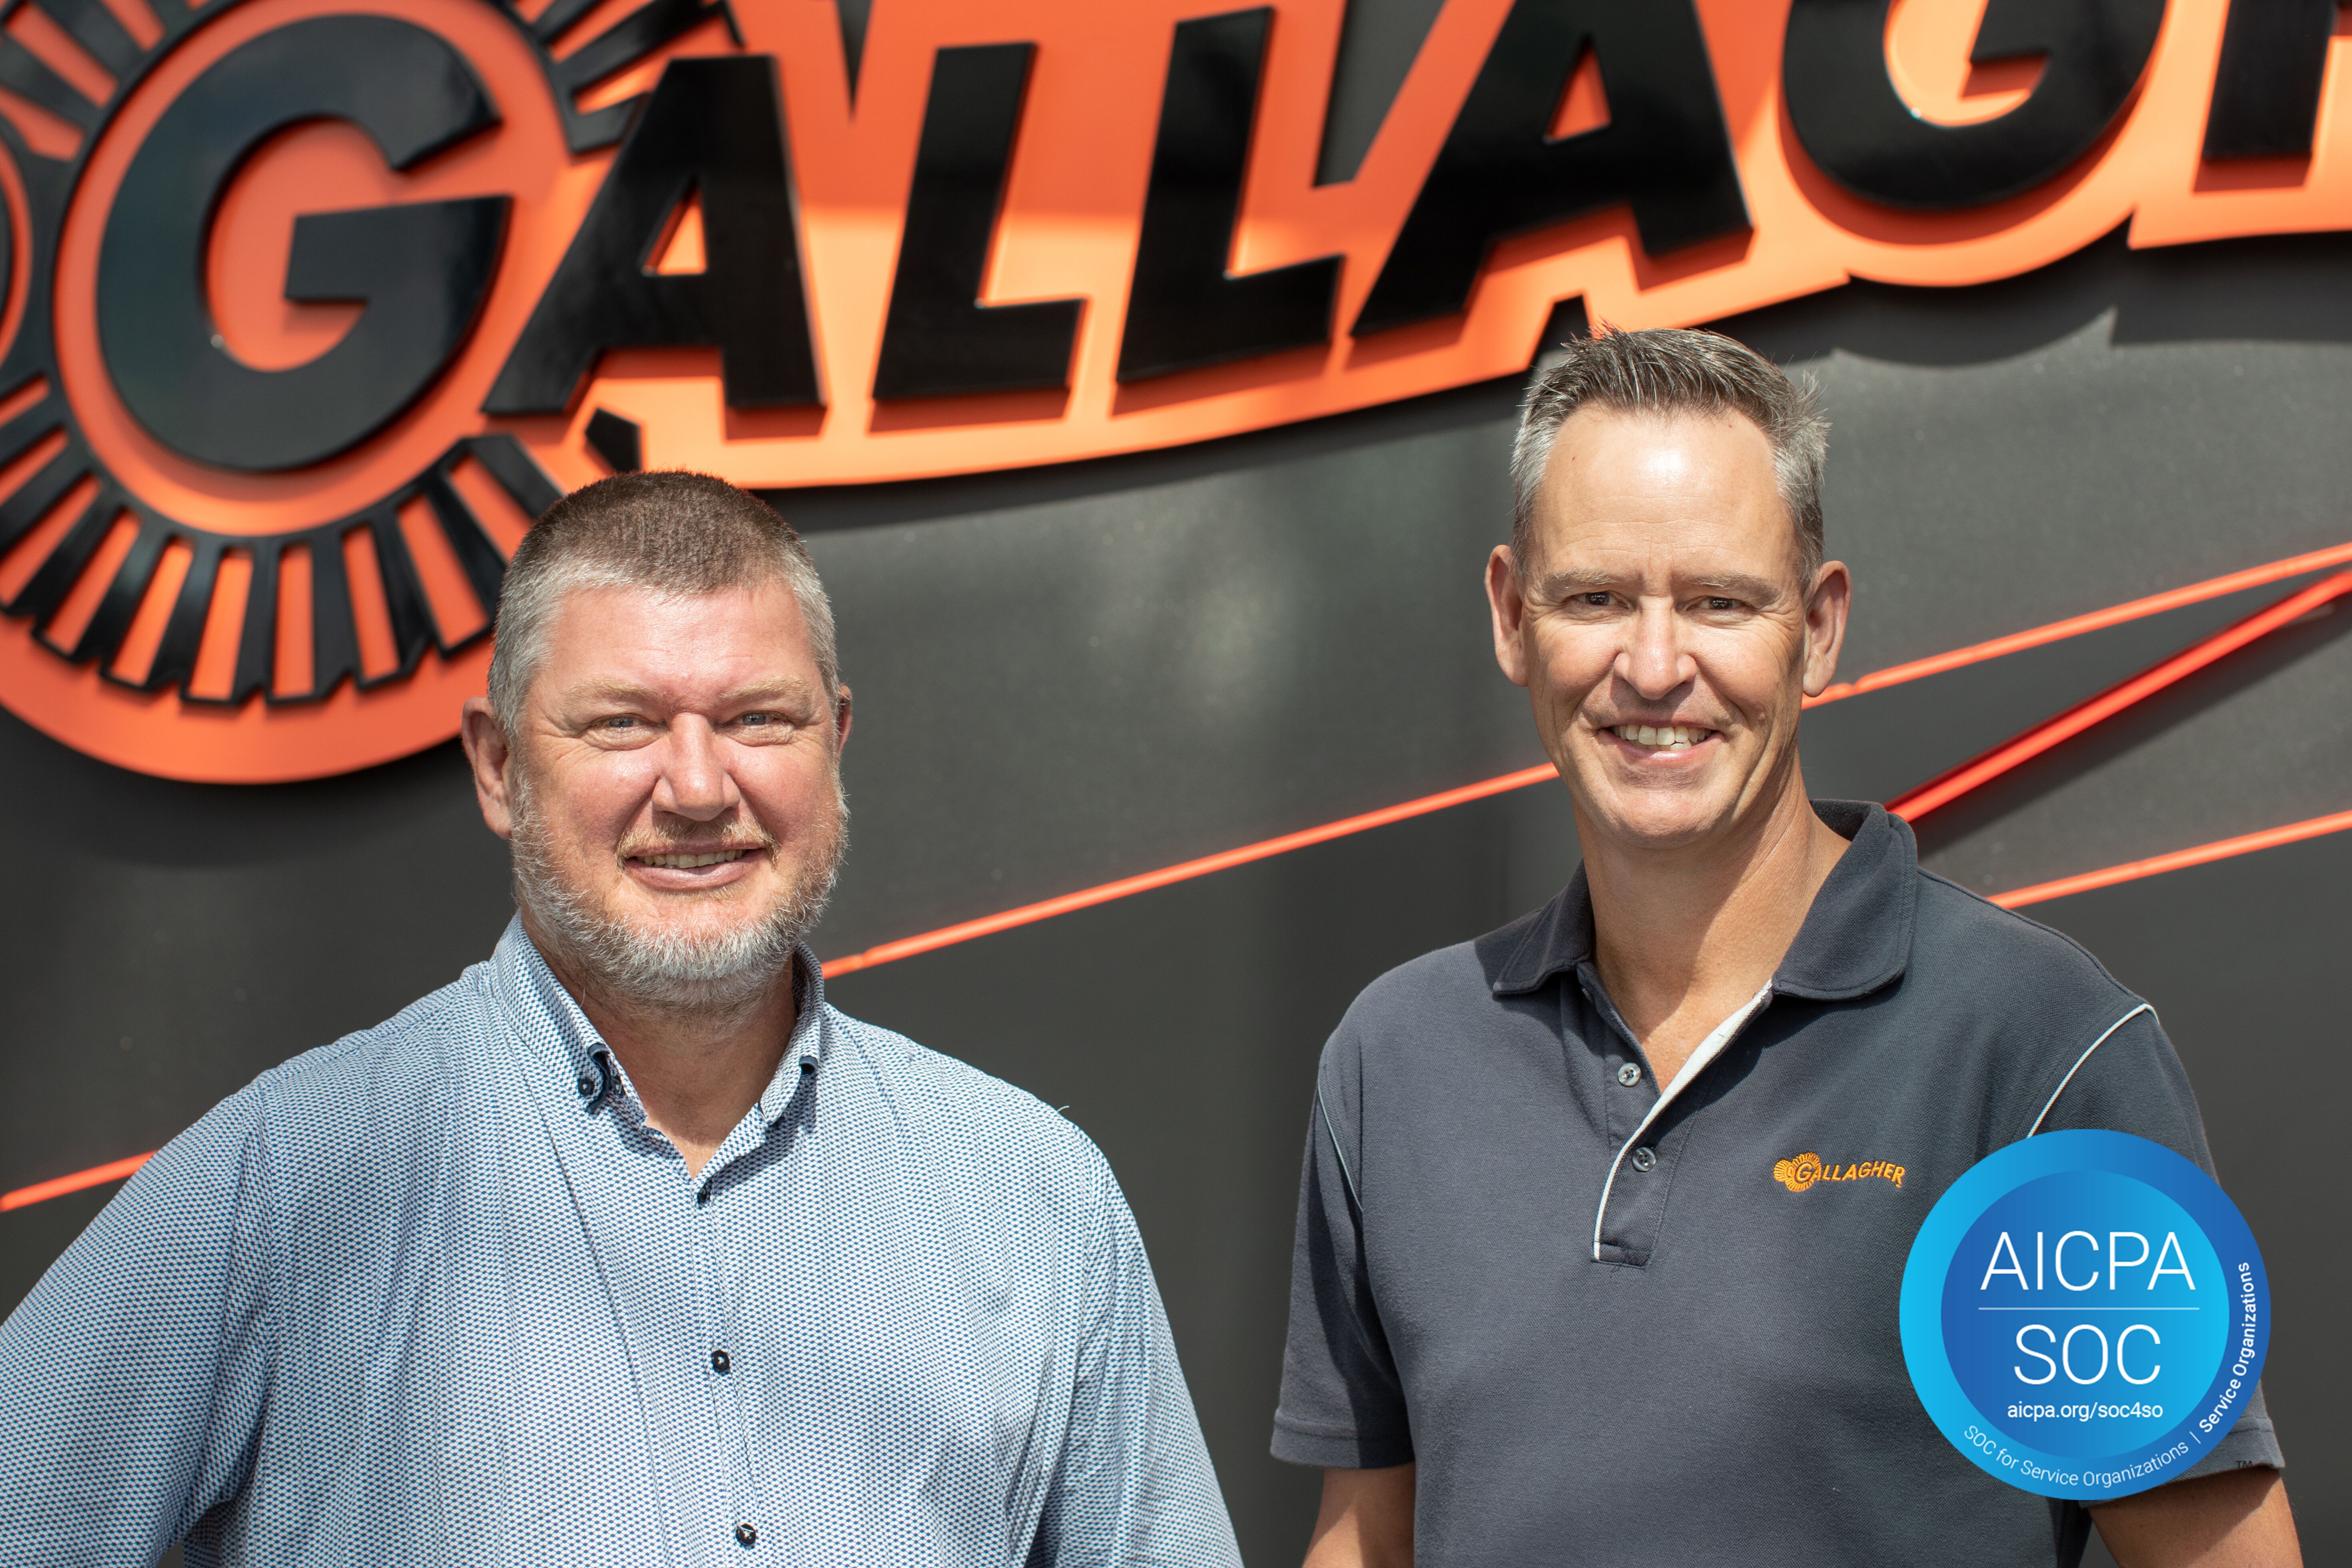 Gallagher Security Global General Manager - Mark Junge and Value Stream Lead - Guy Irvine-General Purpose